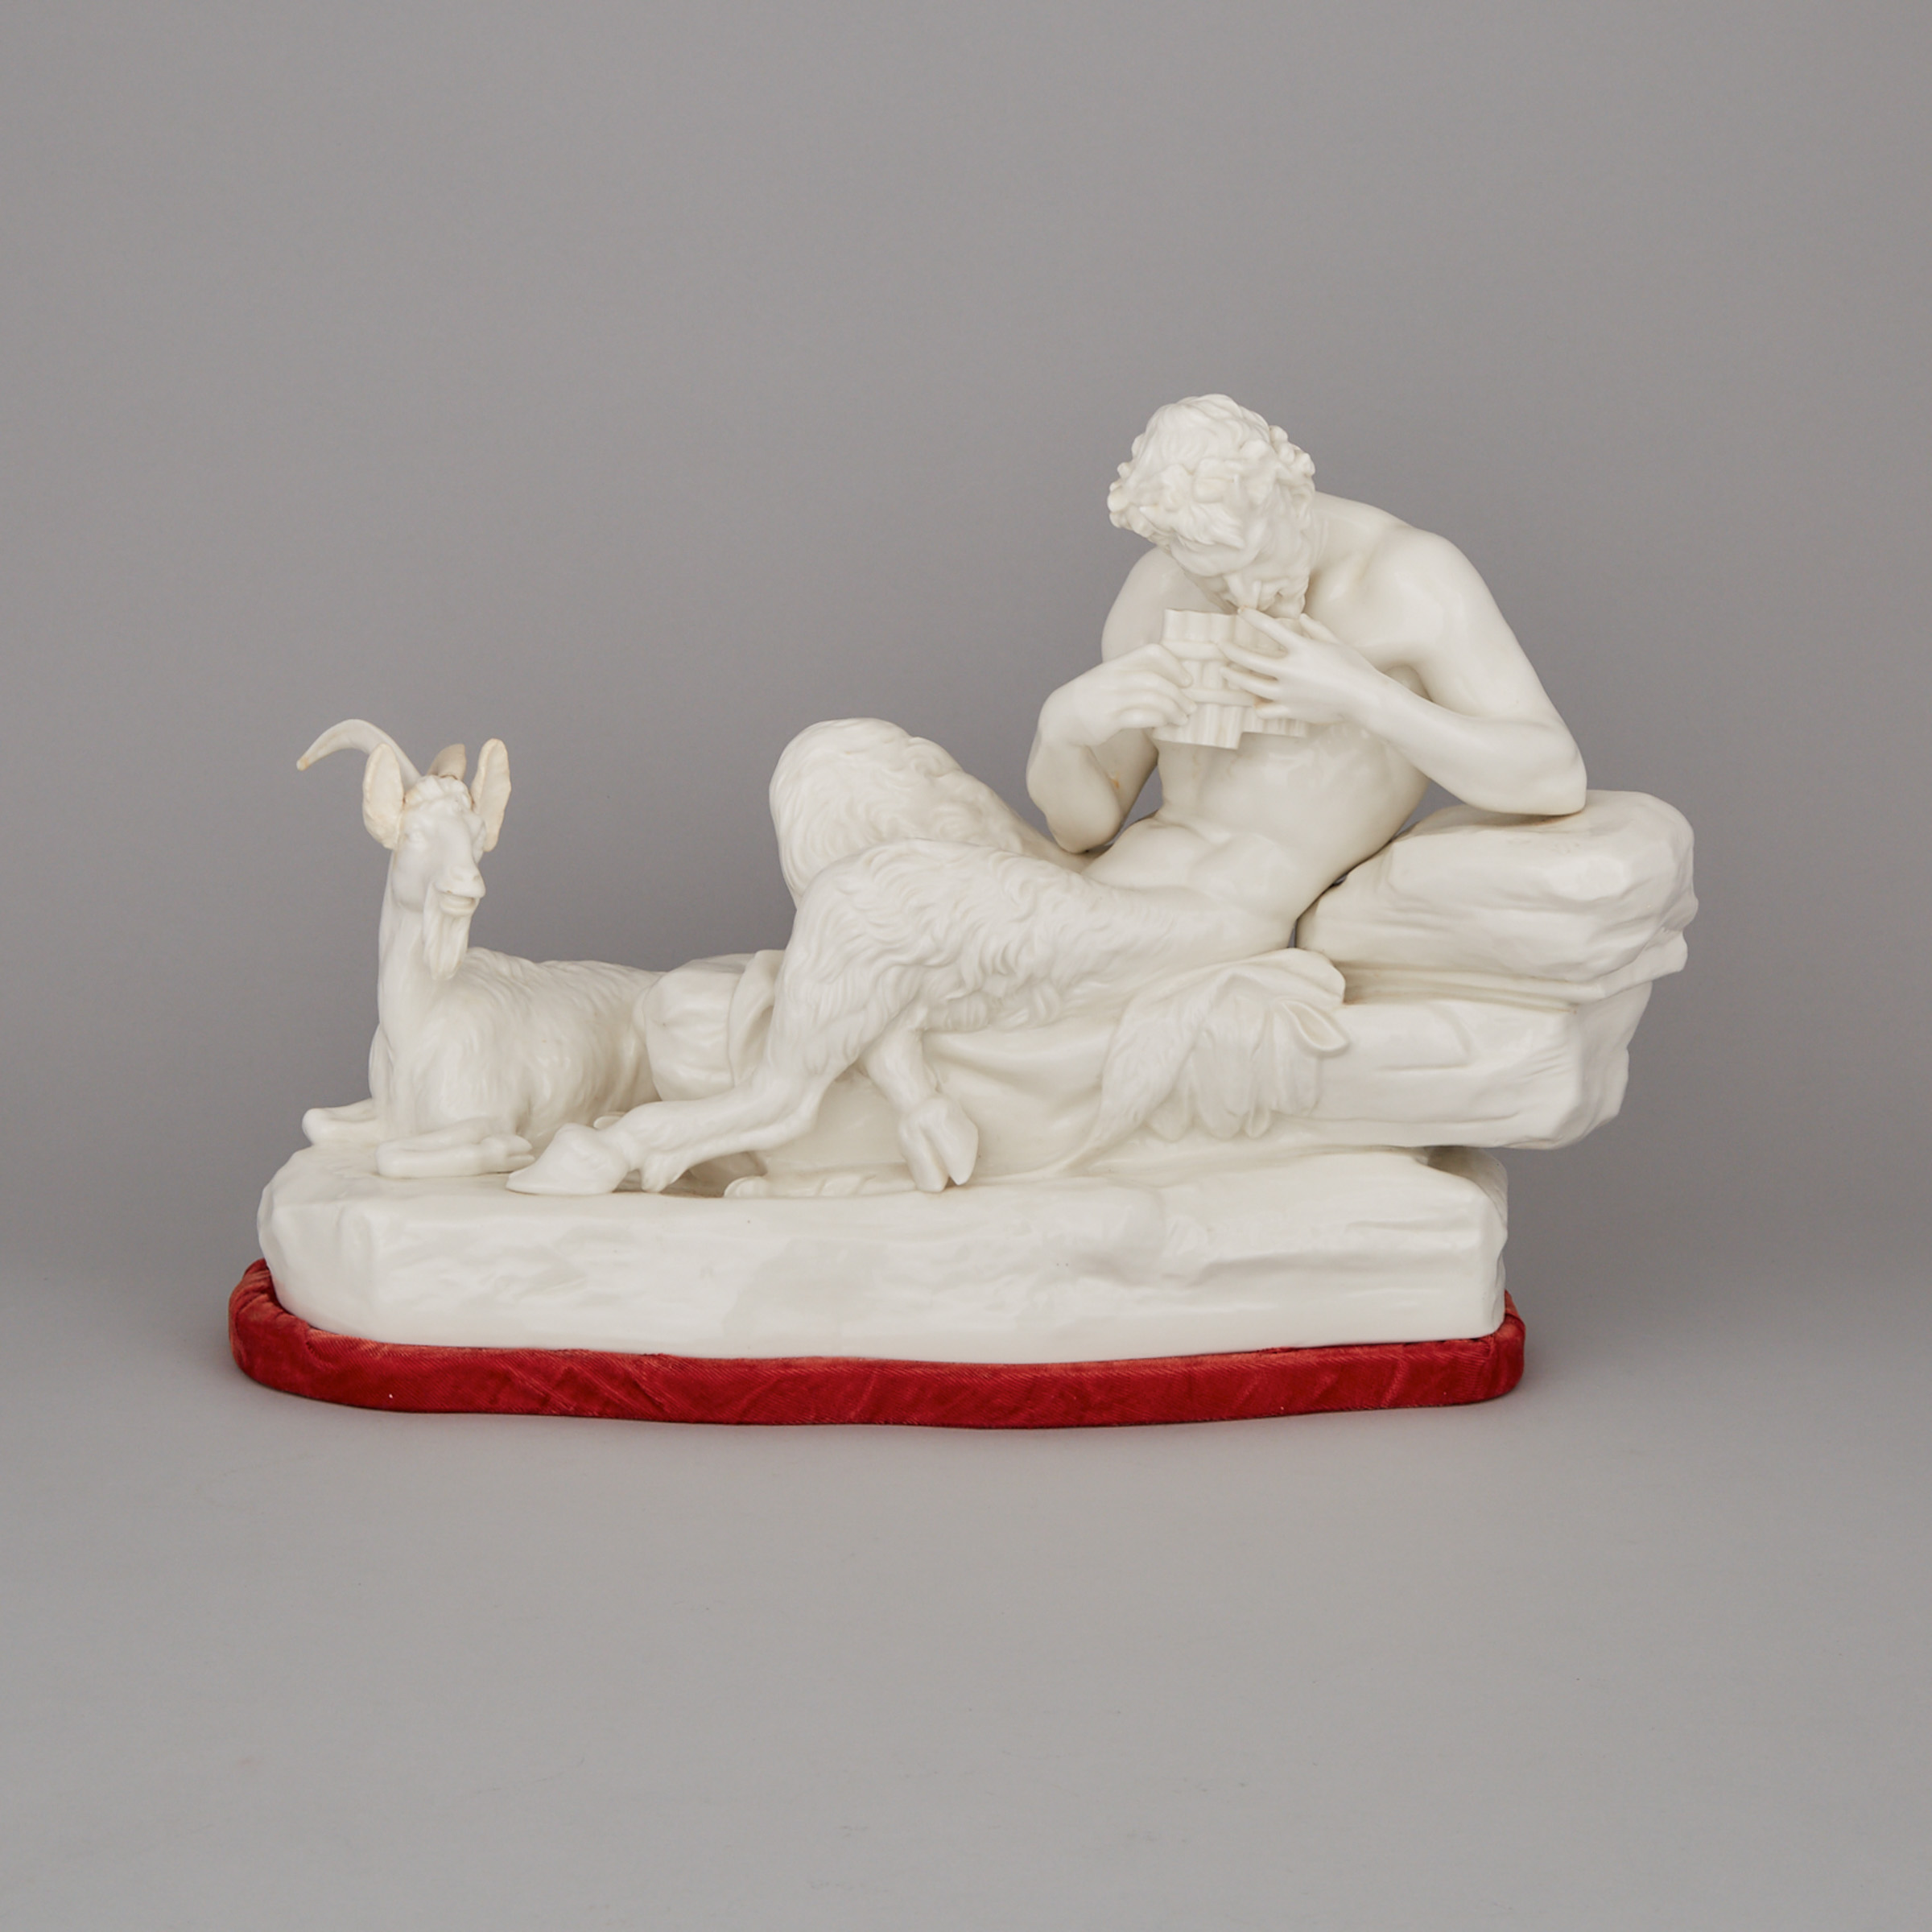 Nymphenburg Blanc de Chine Glazed Figure Group of Pan Playing His Pipes, 20th century